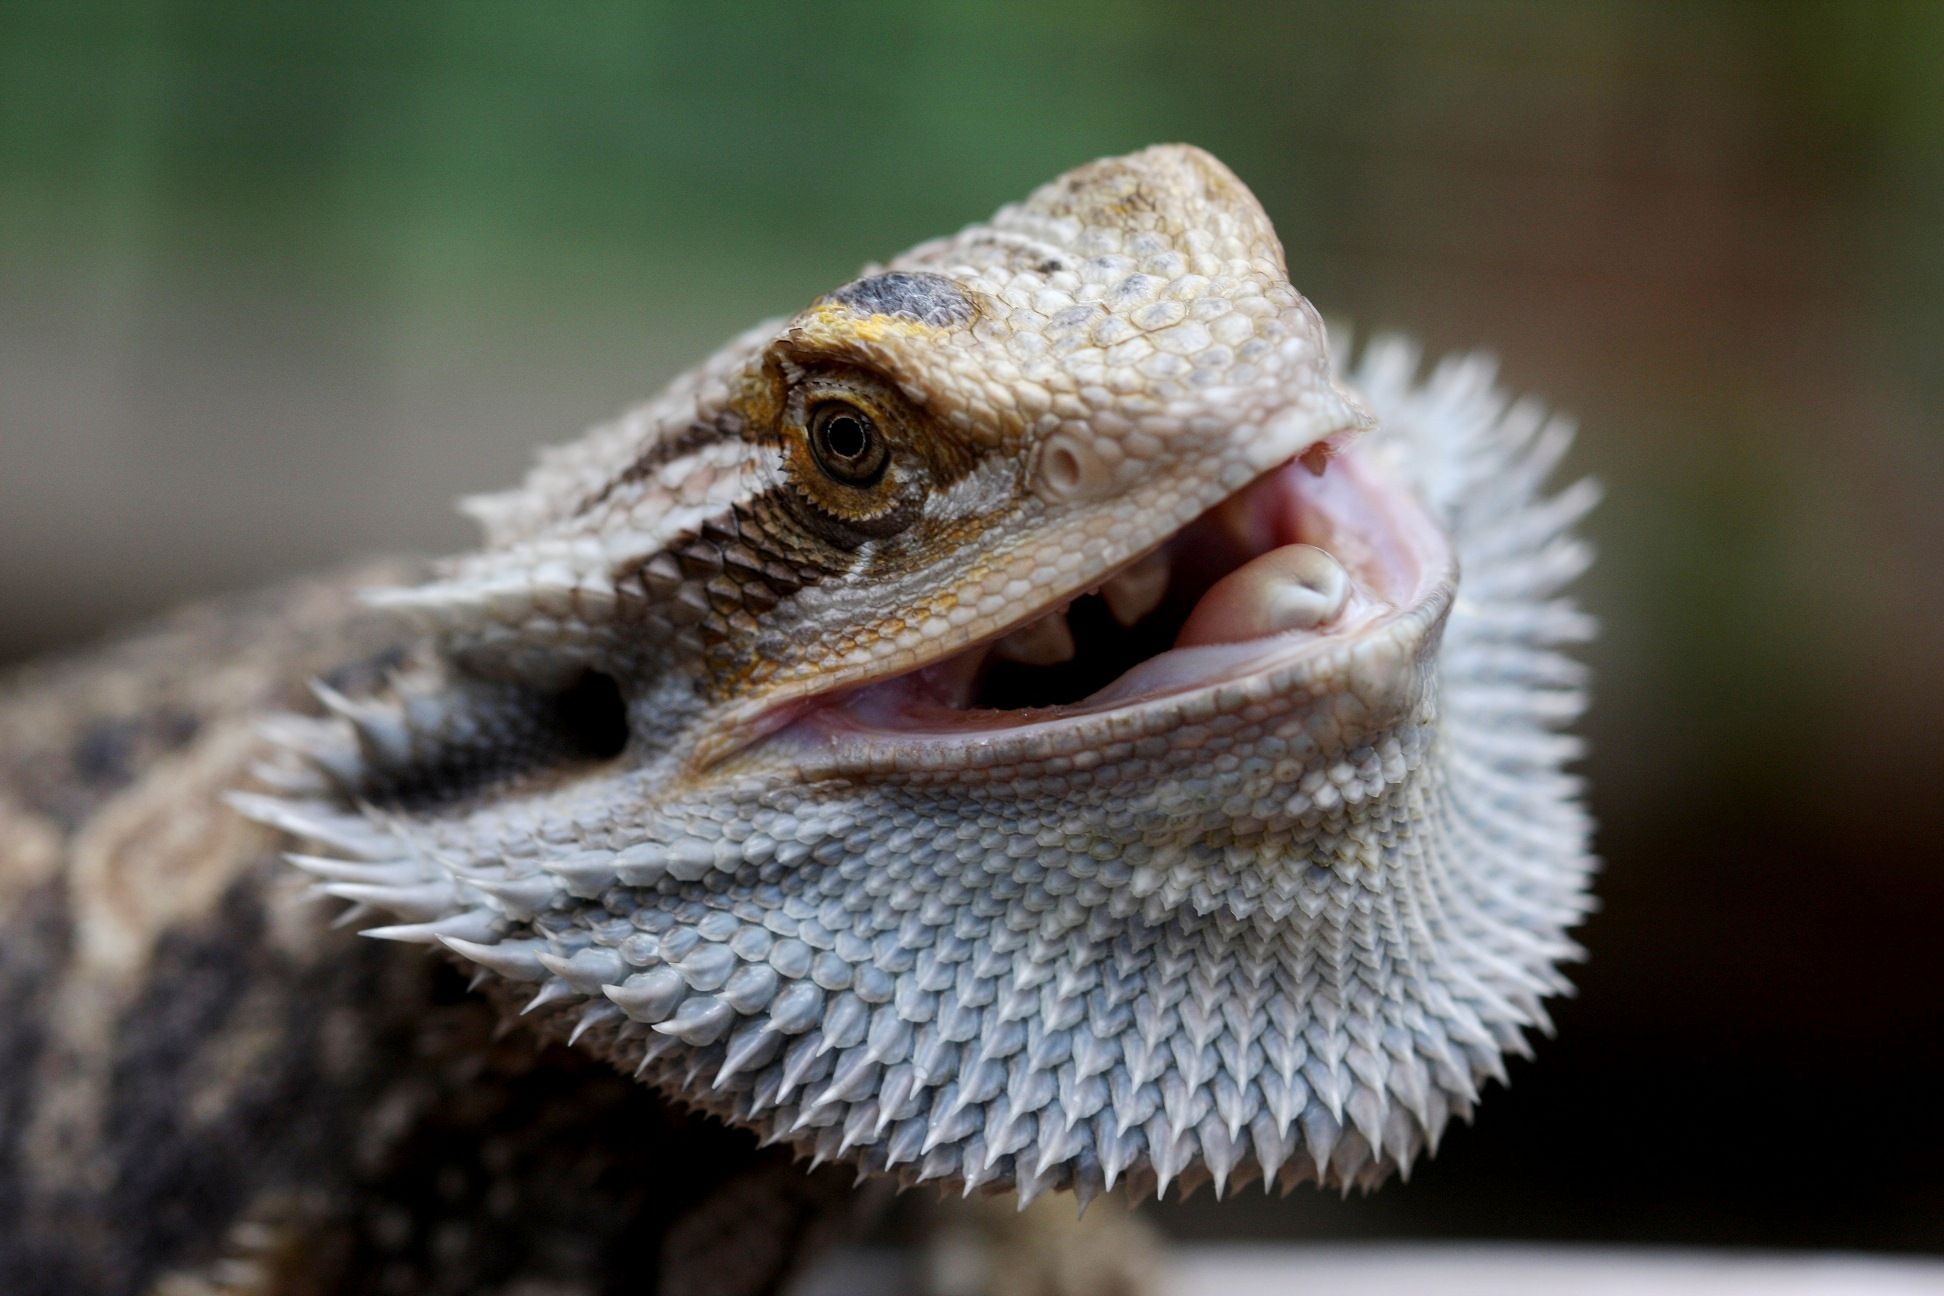 bearded dragon wallpaper,reptile,terrestrial animal,scaled reptile,adaptation,mouth